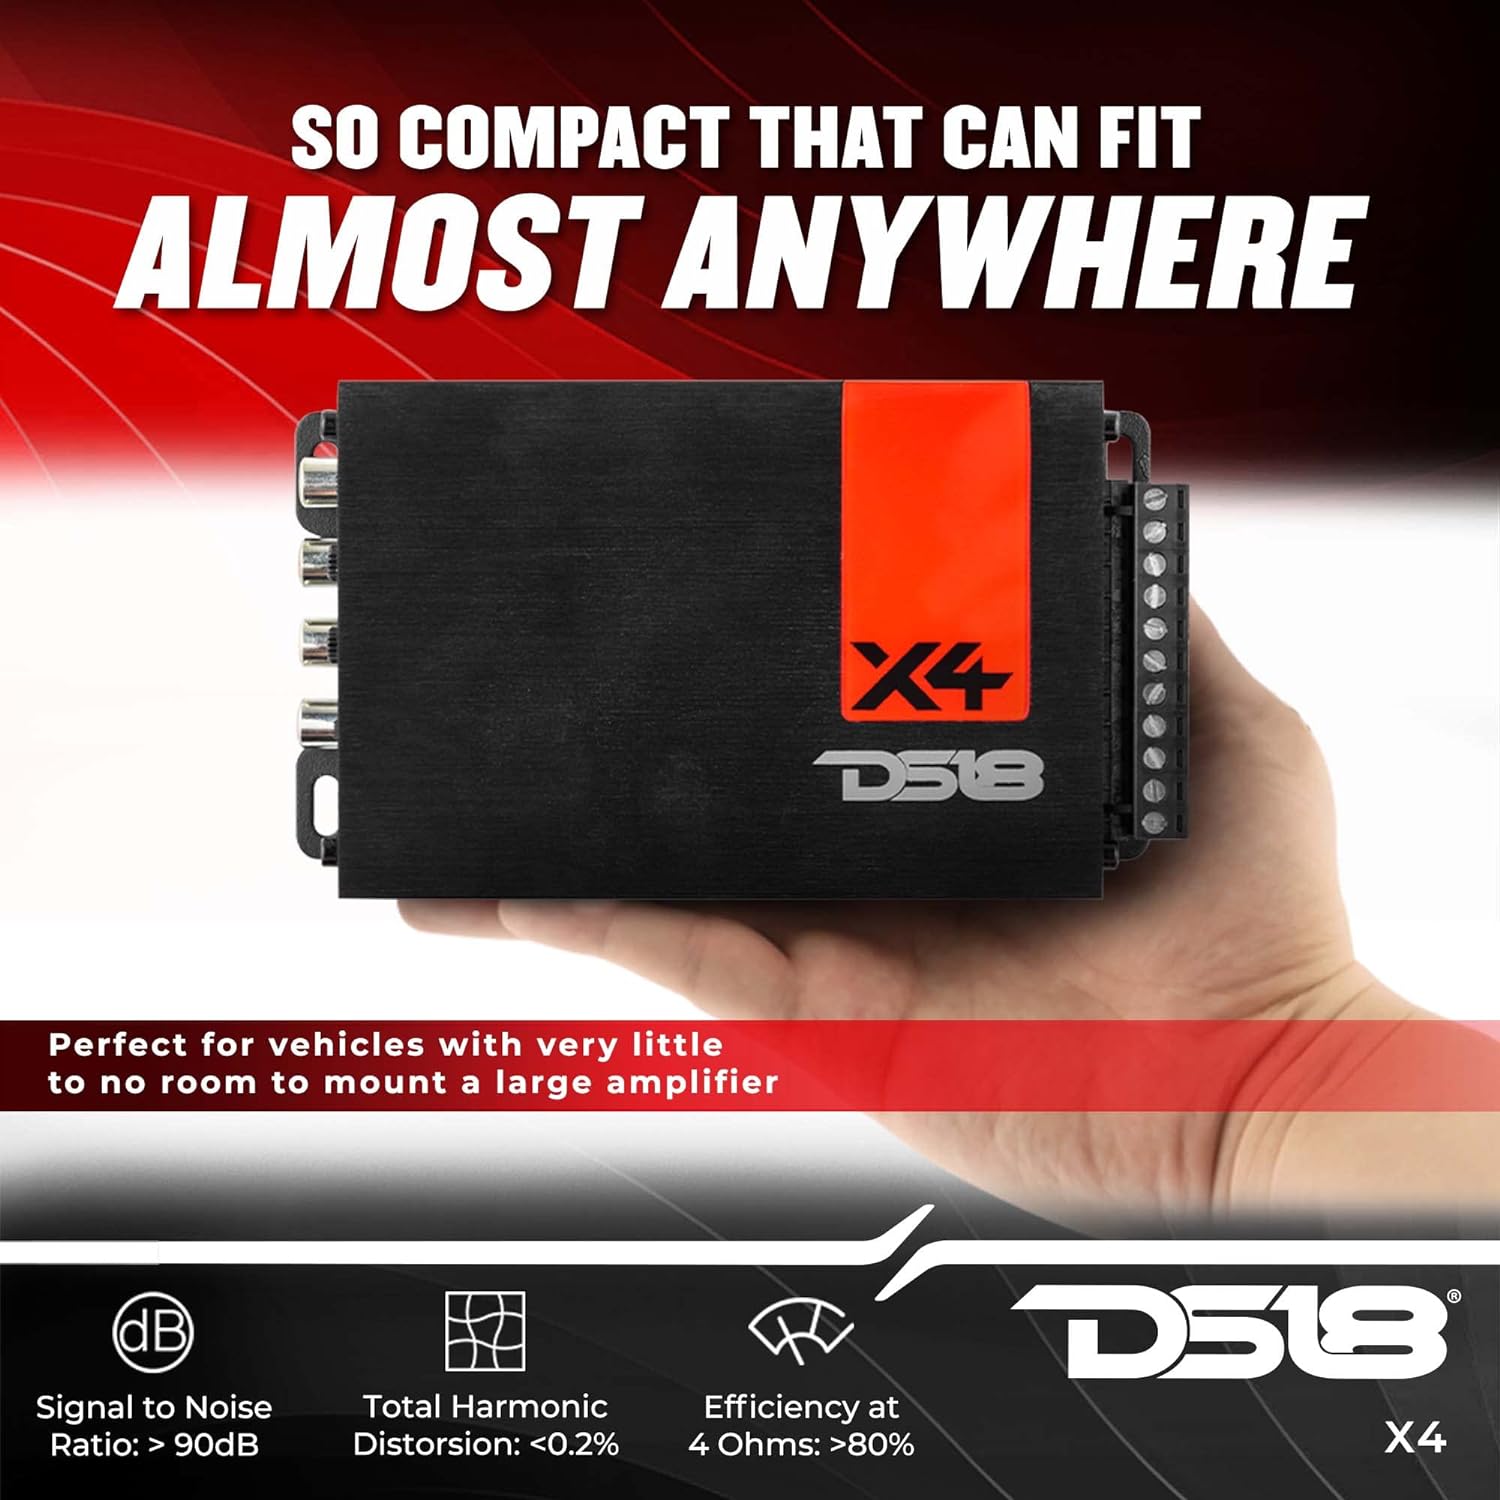 DS18 X4 Ultra Compact Amplifier - 4 Channel, Full Range, Class D, 1400 Watts - Ultra Small Size for Easy Installation on Many Applications